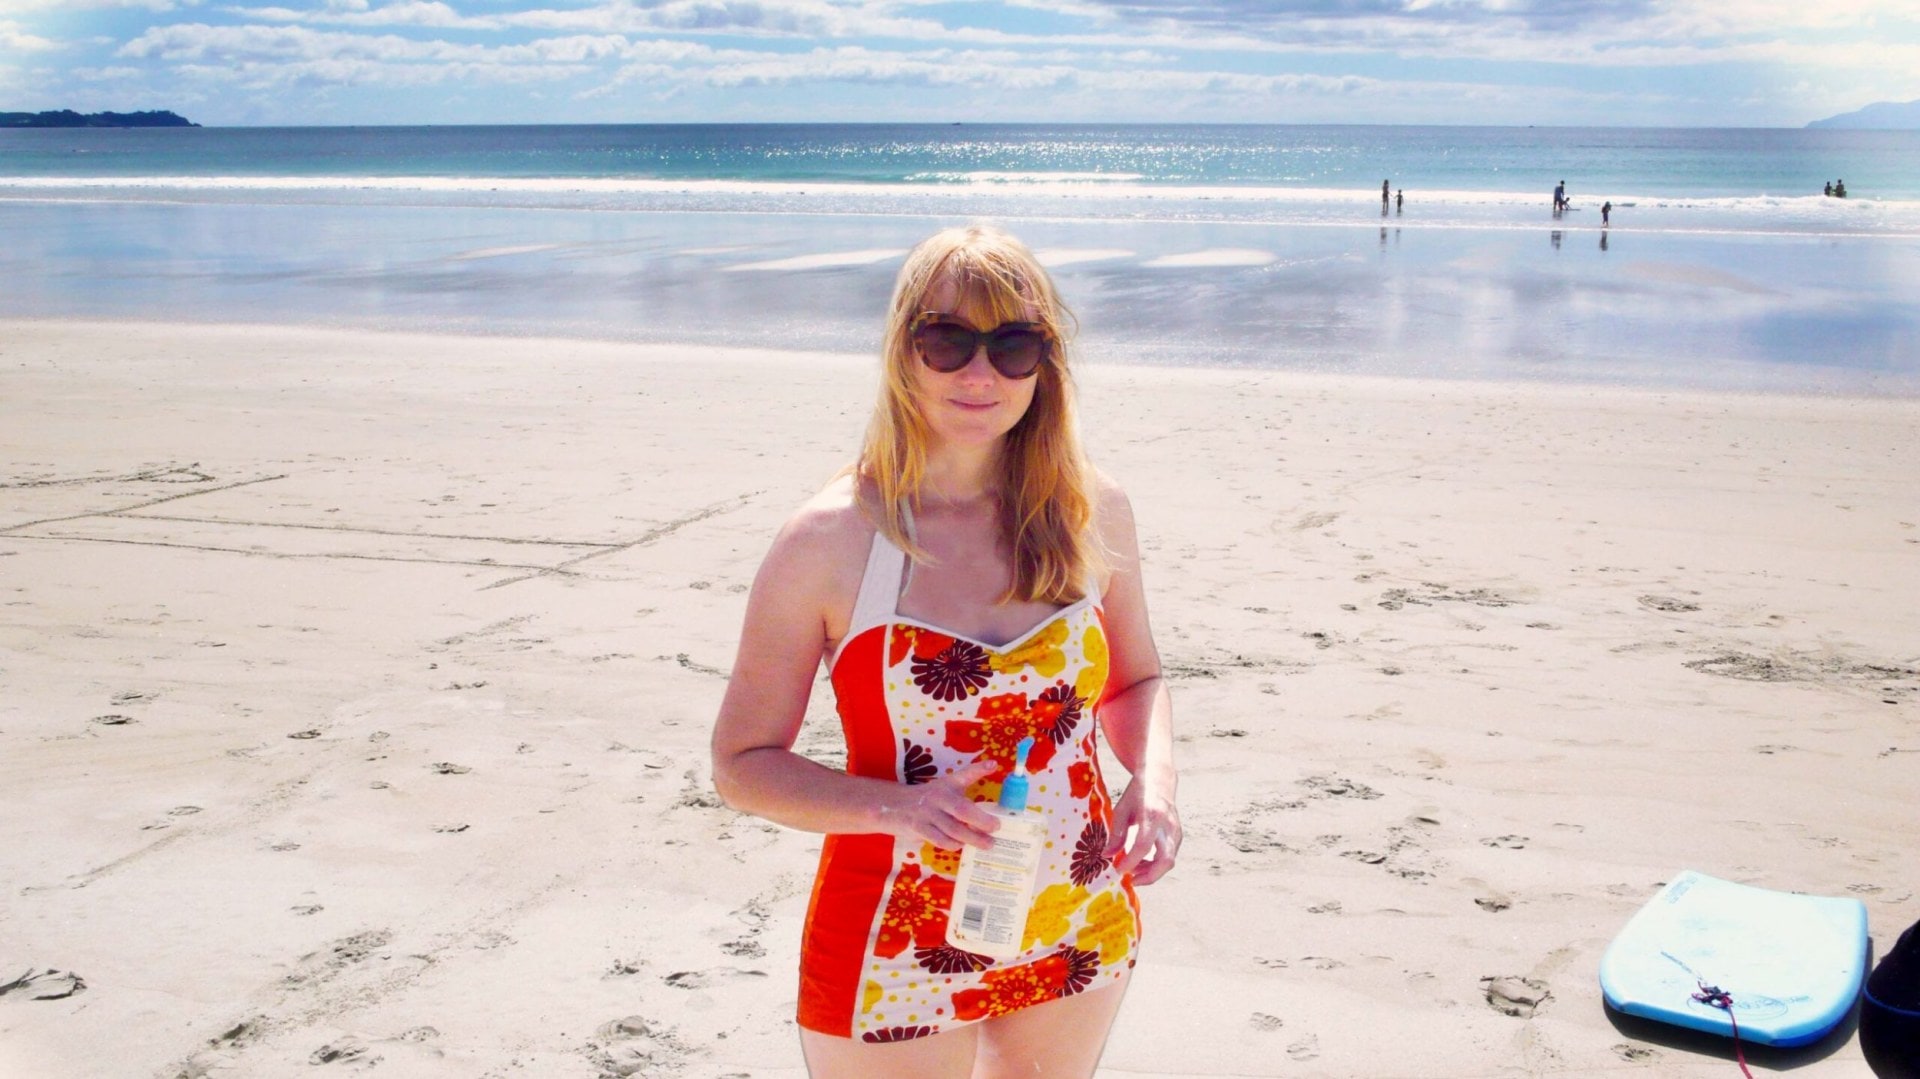 Rachel Clare standing on beach shore wearing patterned red swimsuit